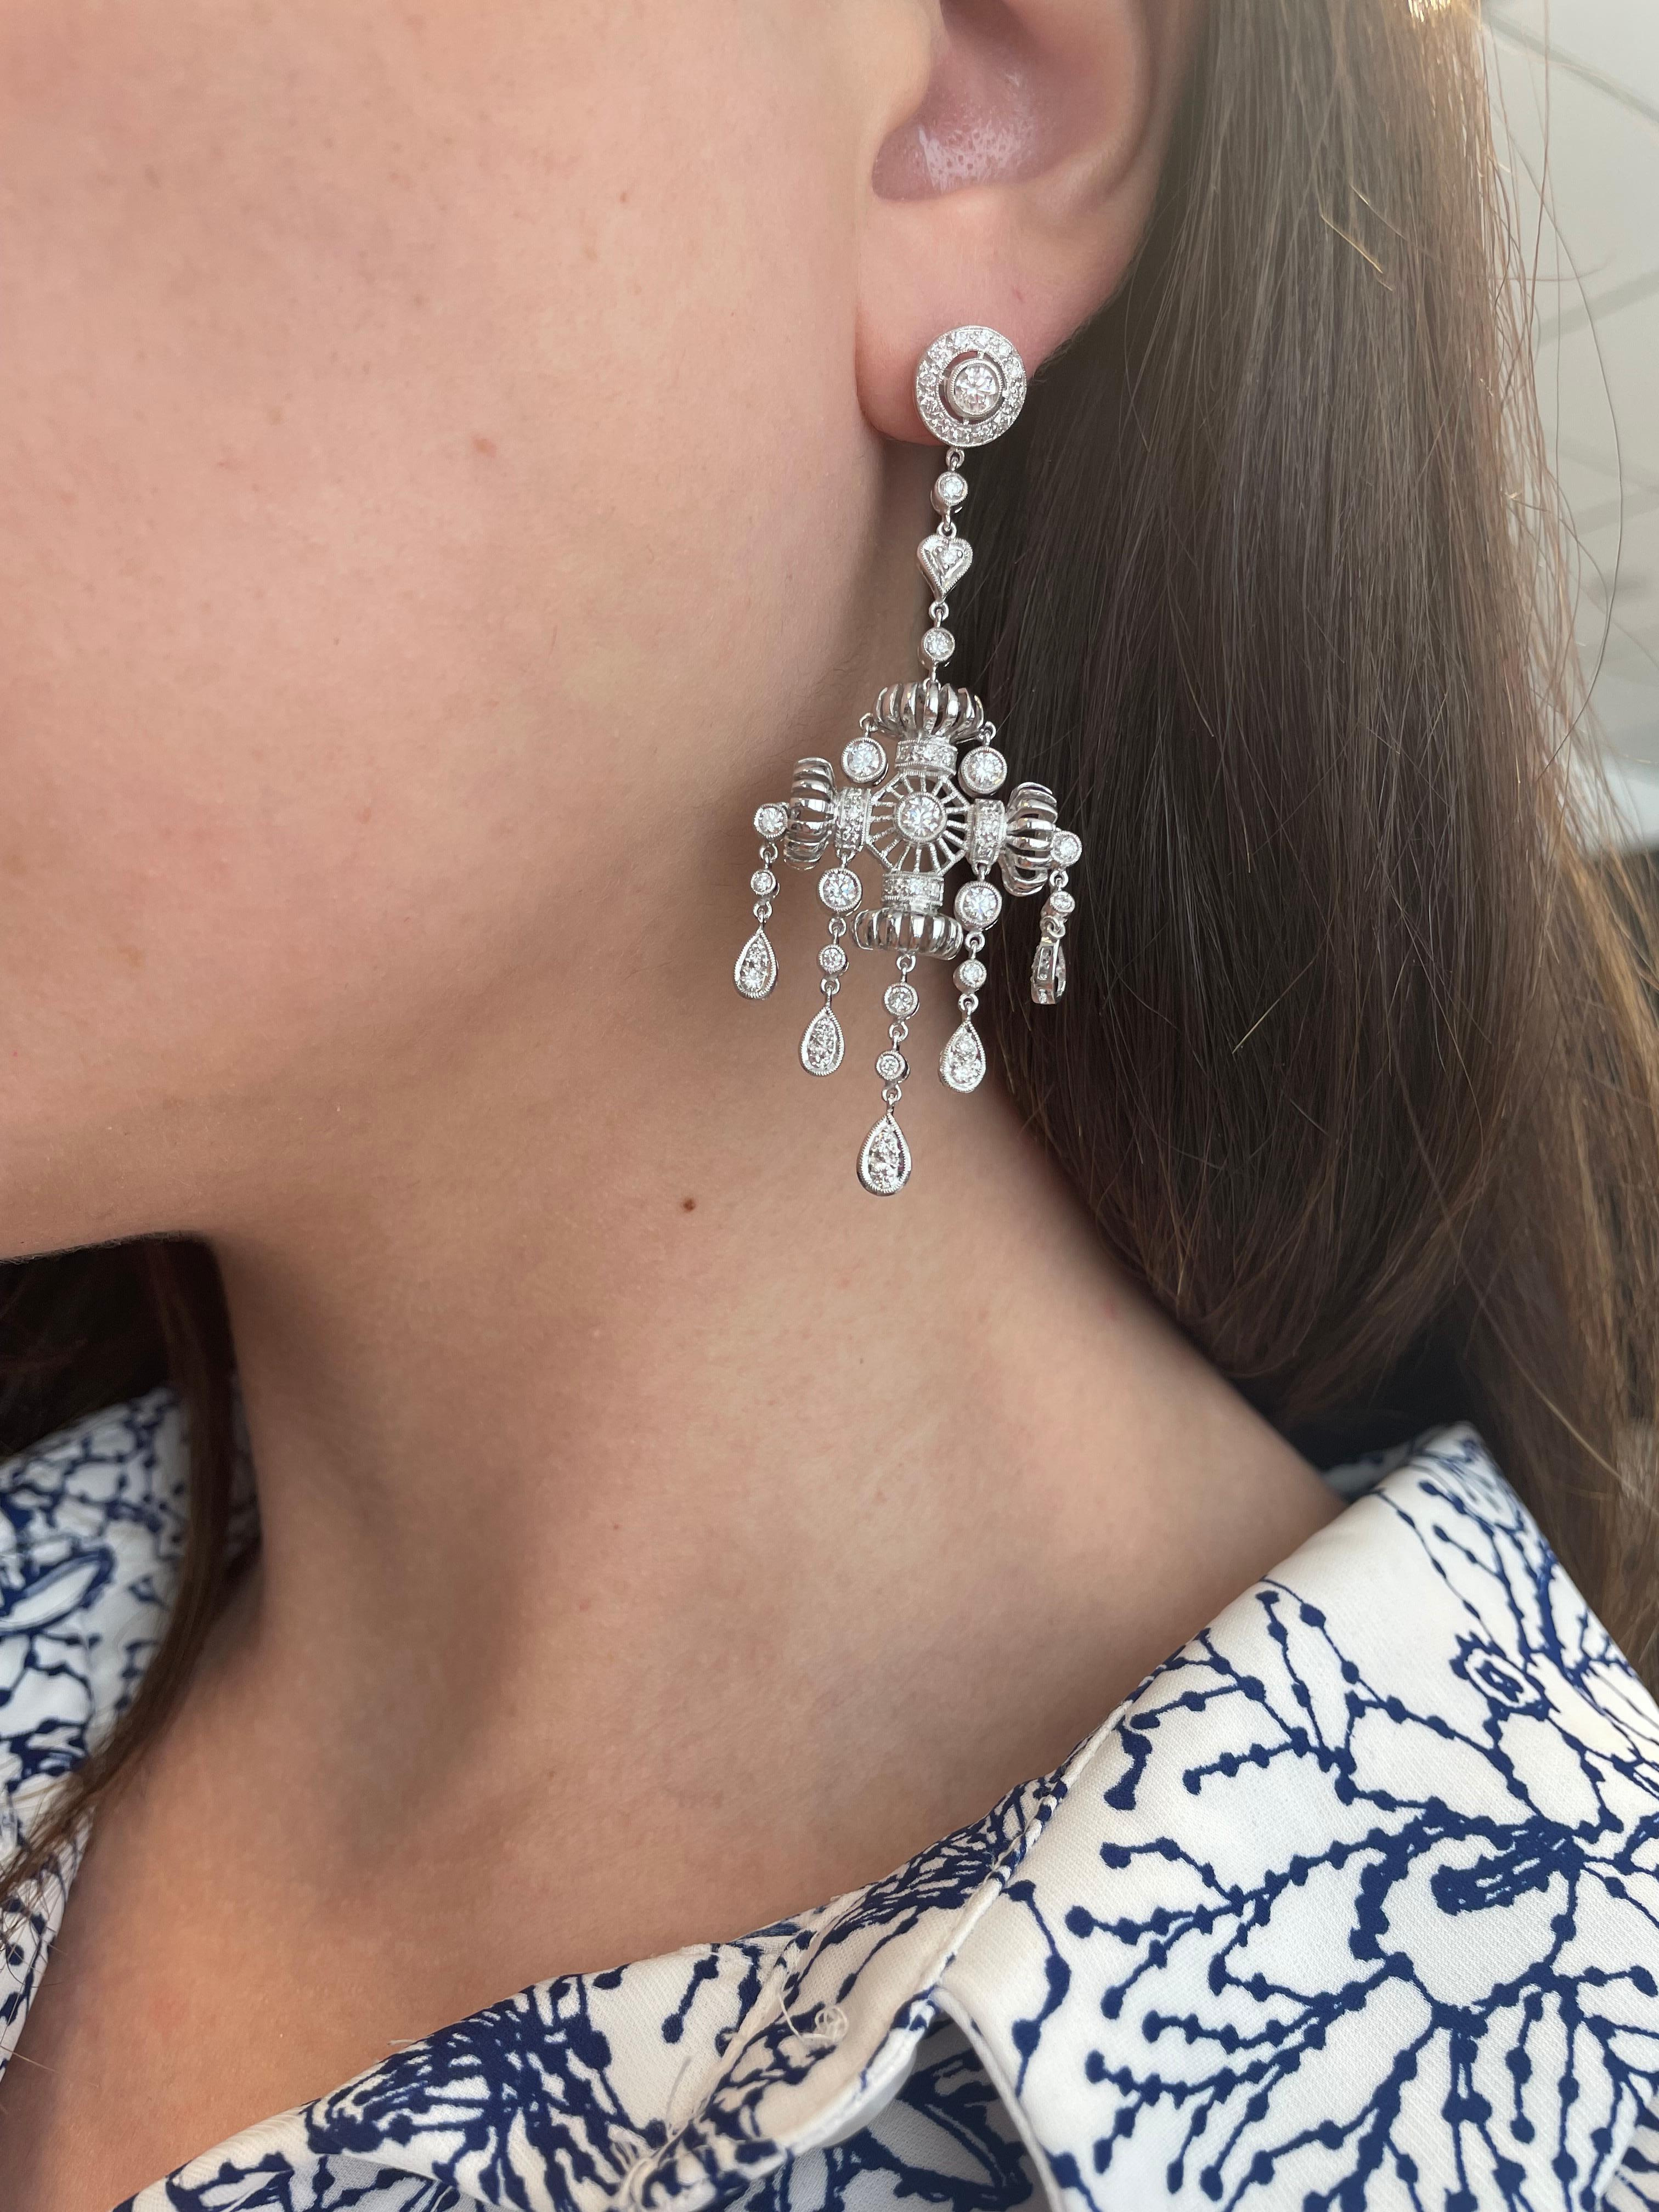 Lovely Edwardian inspired diamond chandelier earrings.
104 round brilliant diamonds, 2.88 carats. Approximately G/H color and SI clarity. 18-karat white gold.
Accommodated with an up to date appraisal by a GIA G.G. upon request. Please contact us